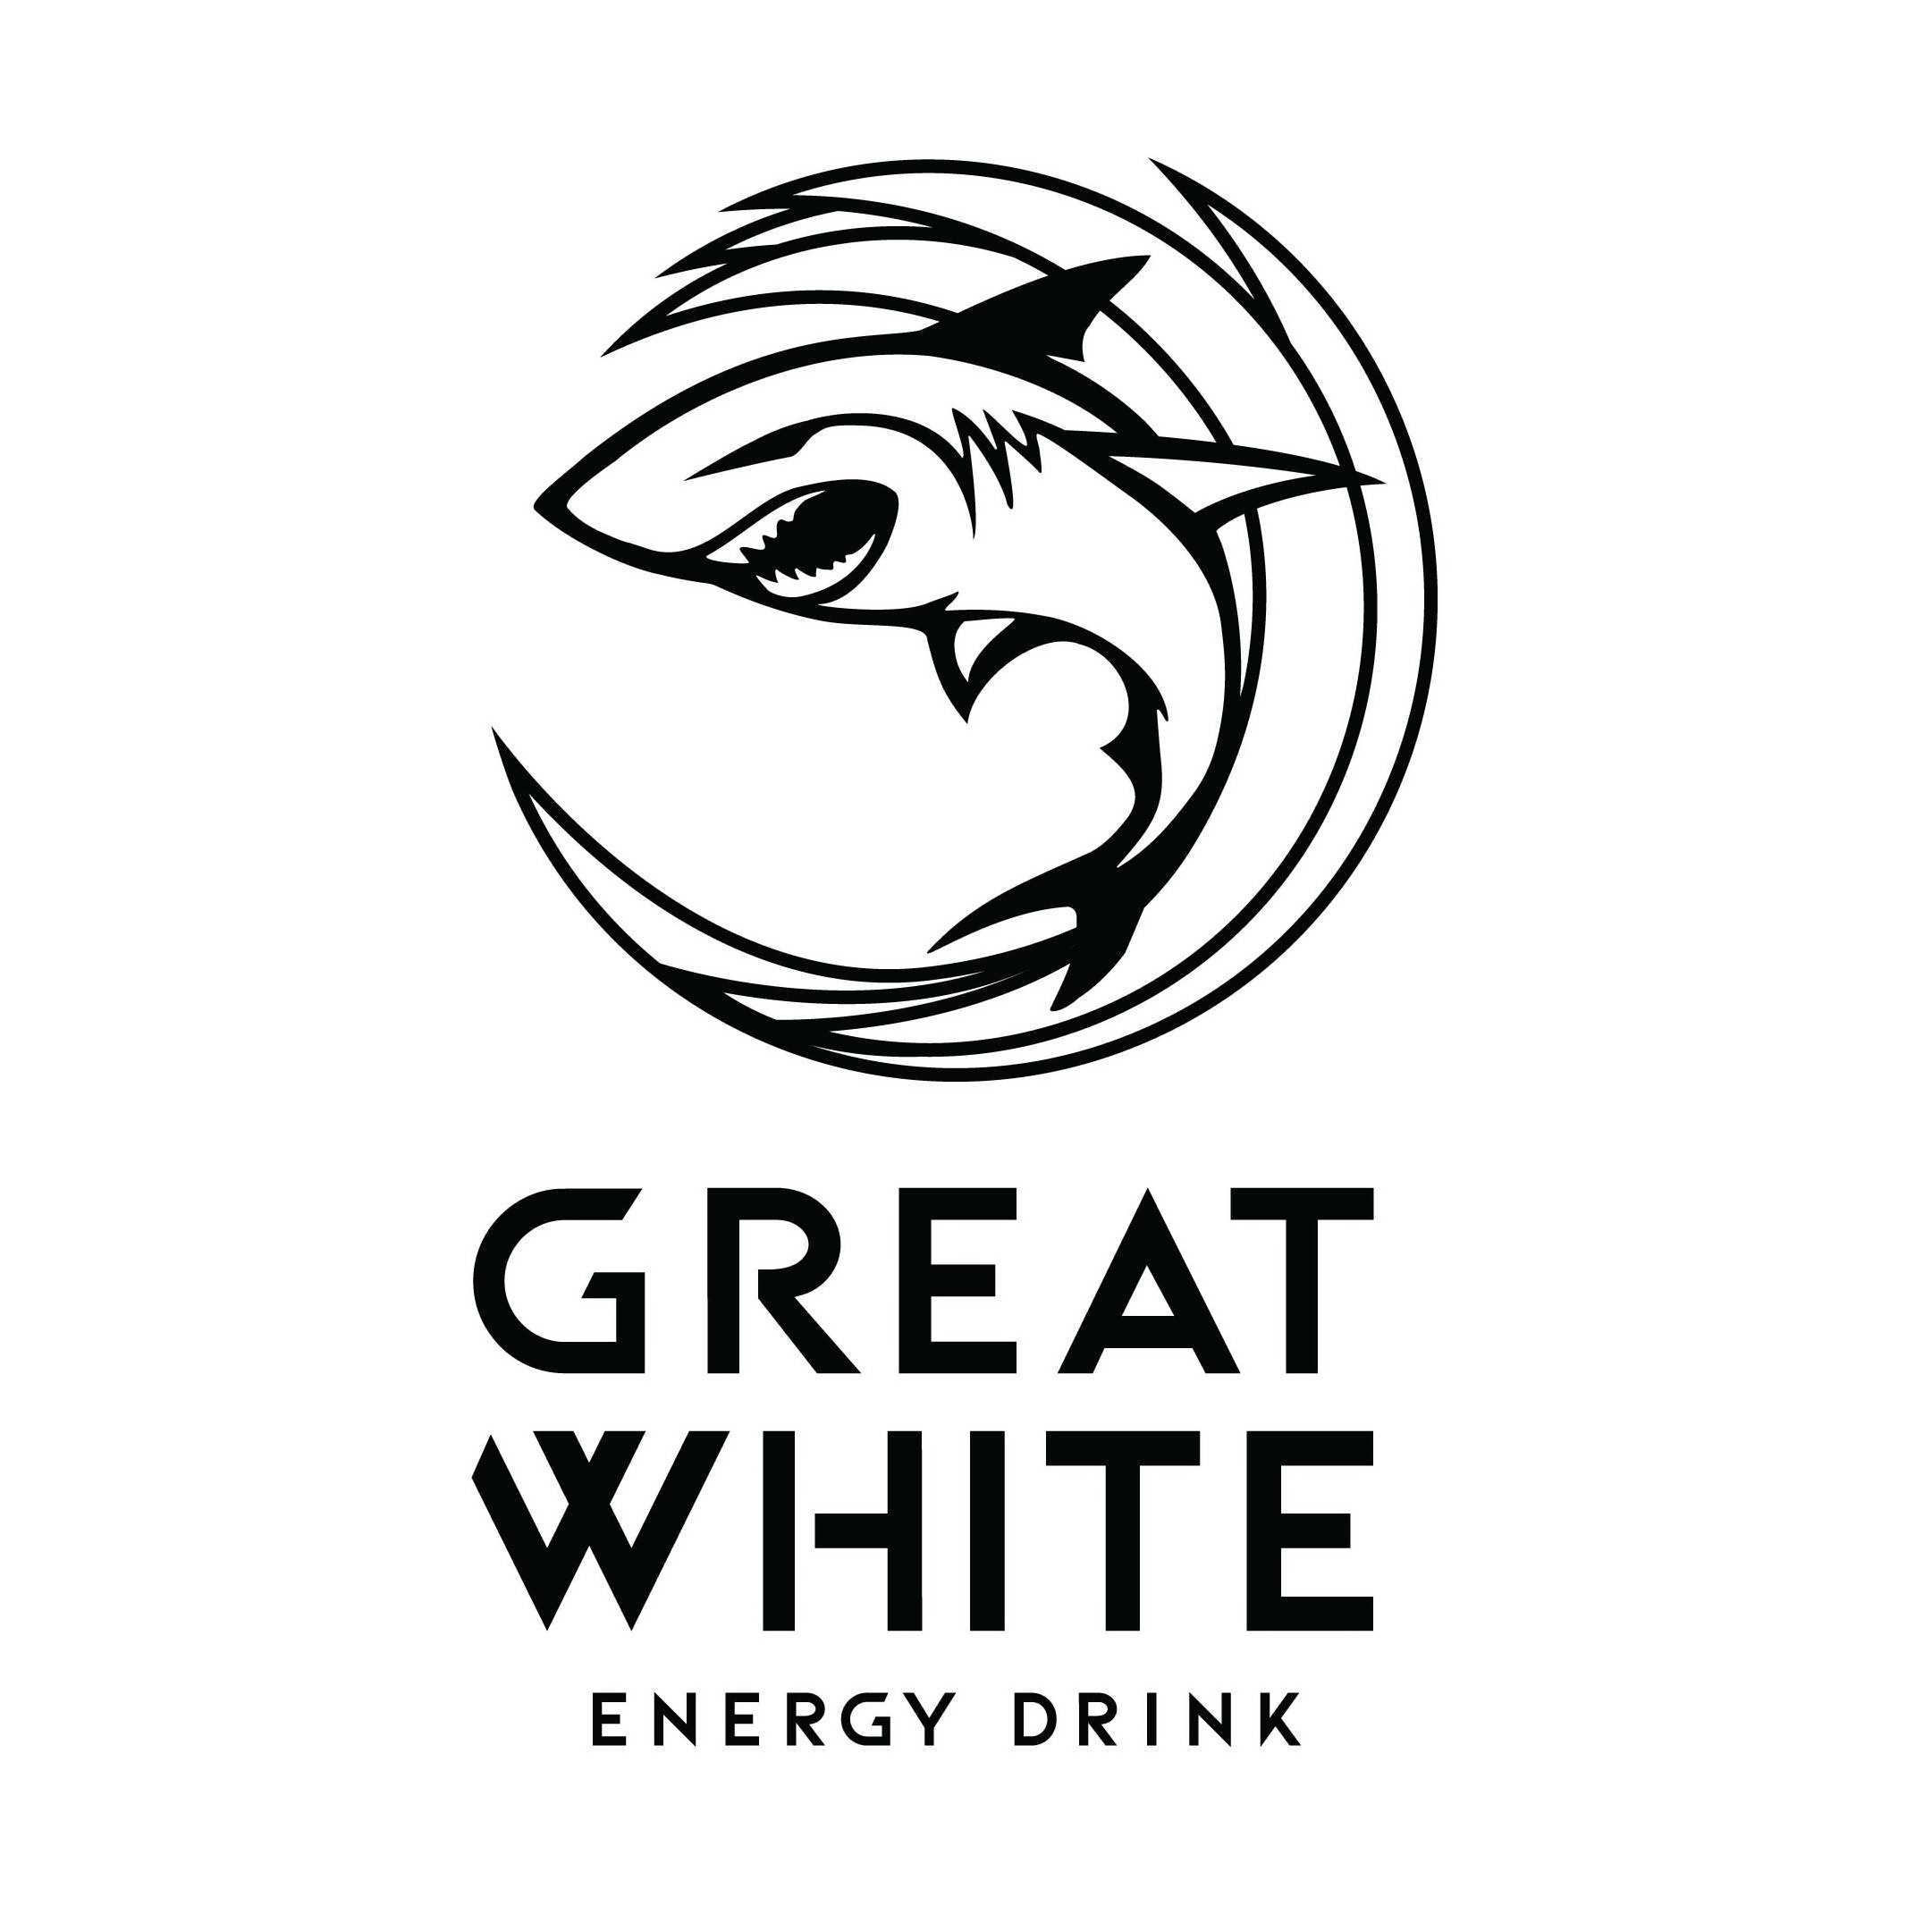 GREAT WHITE ENERGY DRINK